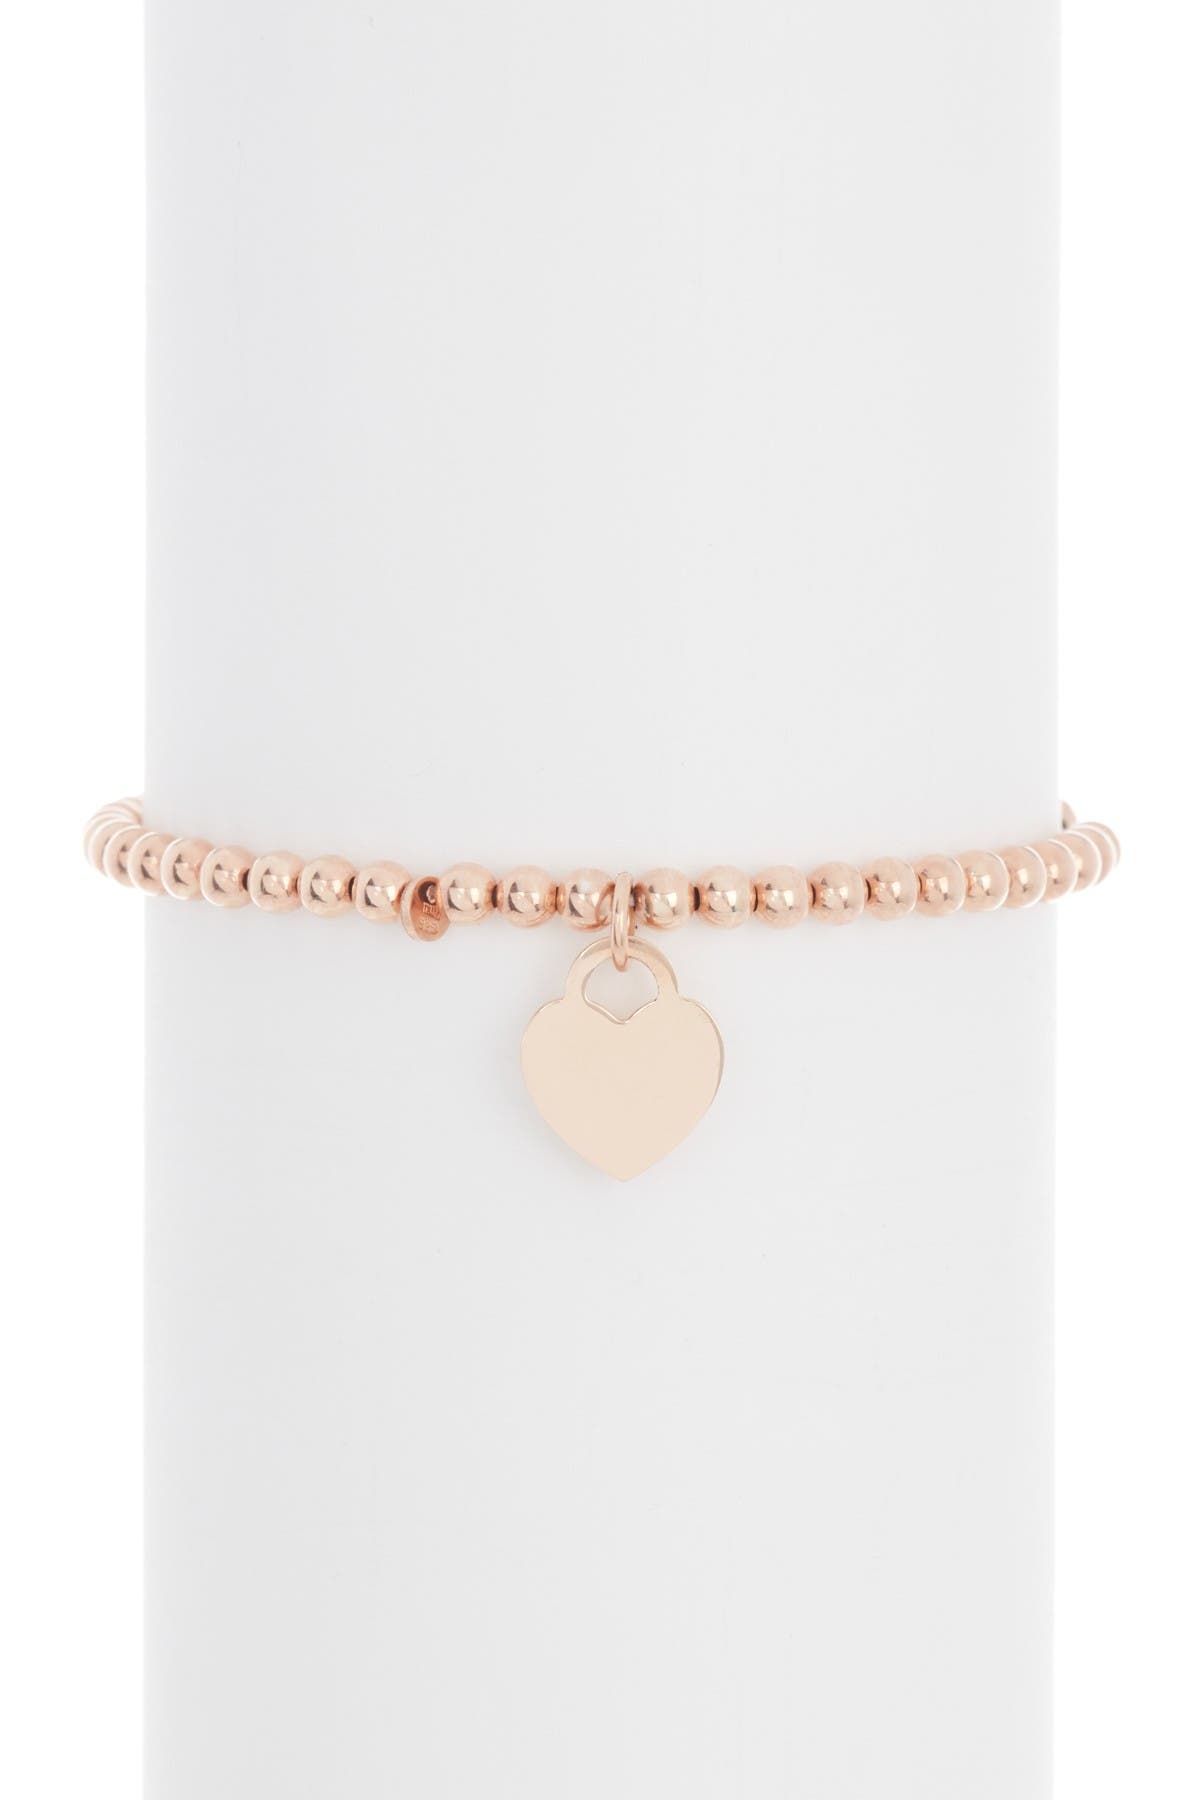 Adornia 14k Rose Gold Plated Ball Bead Heart Charm Bracelet In Pink